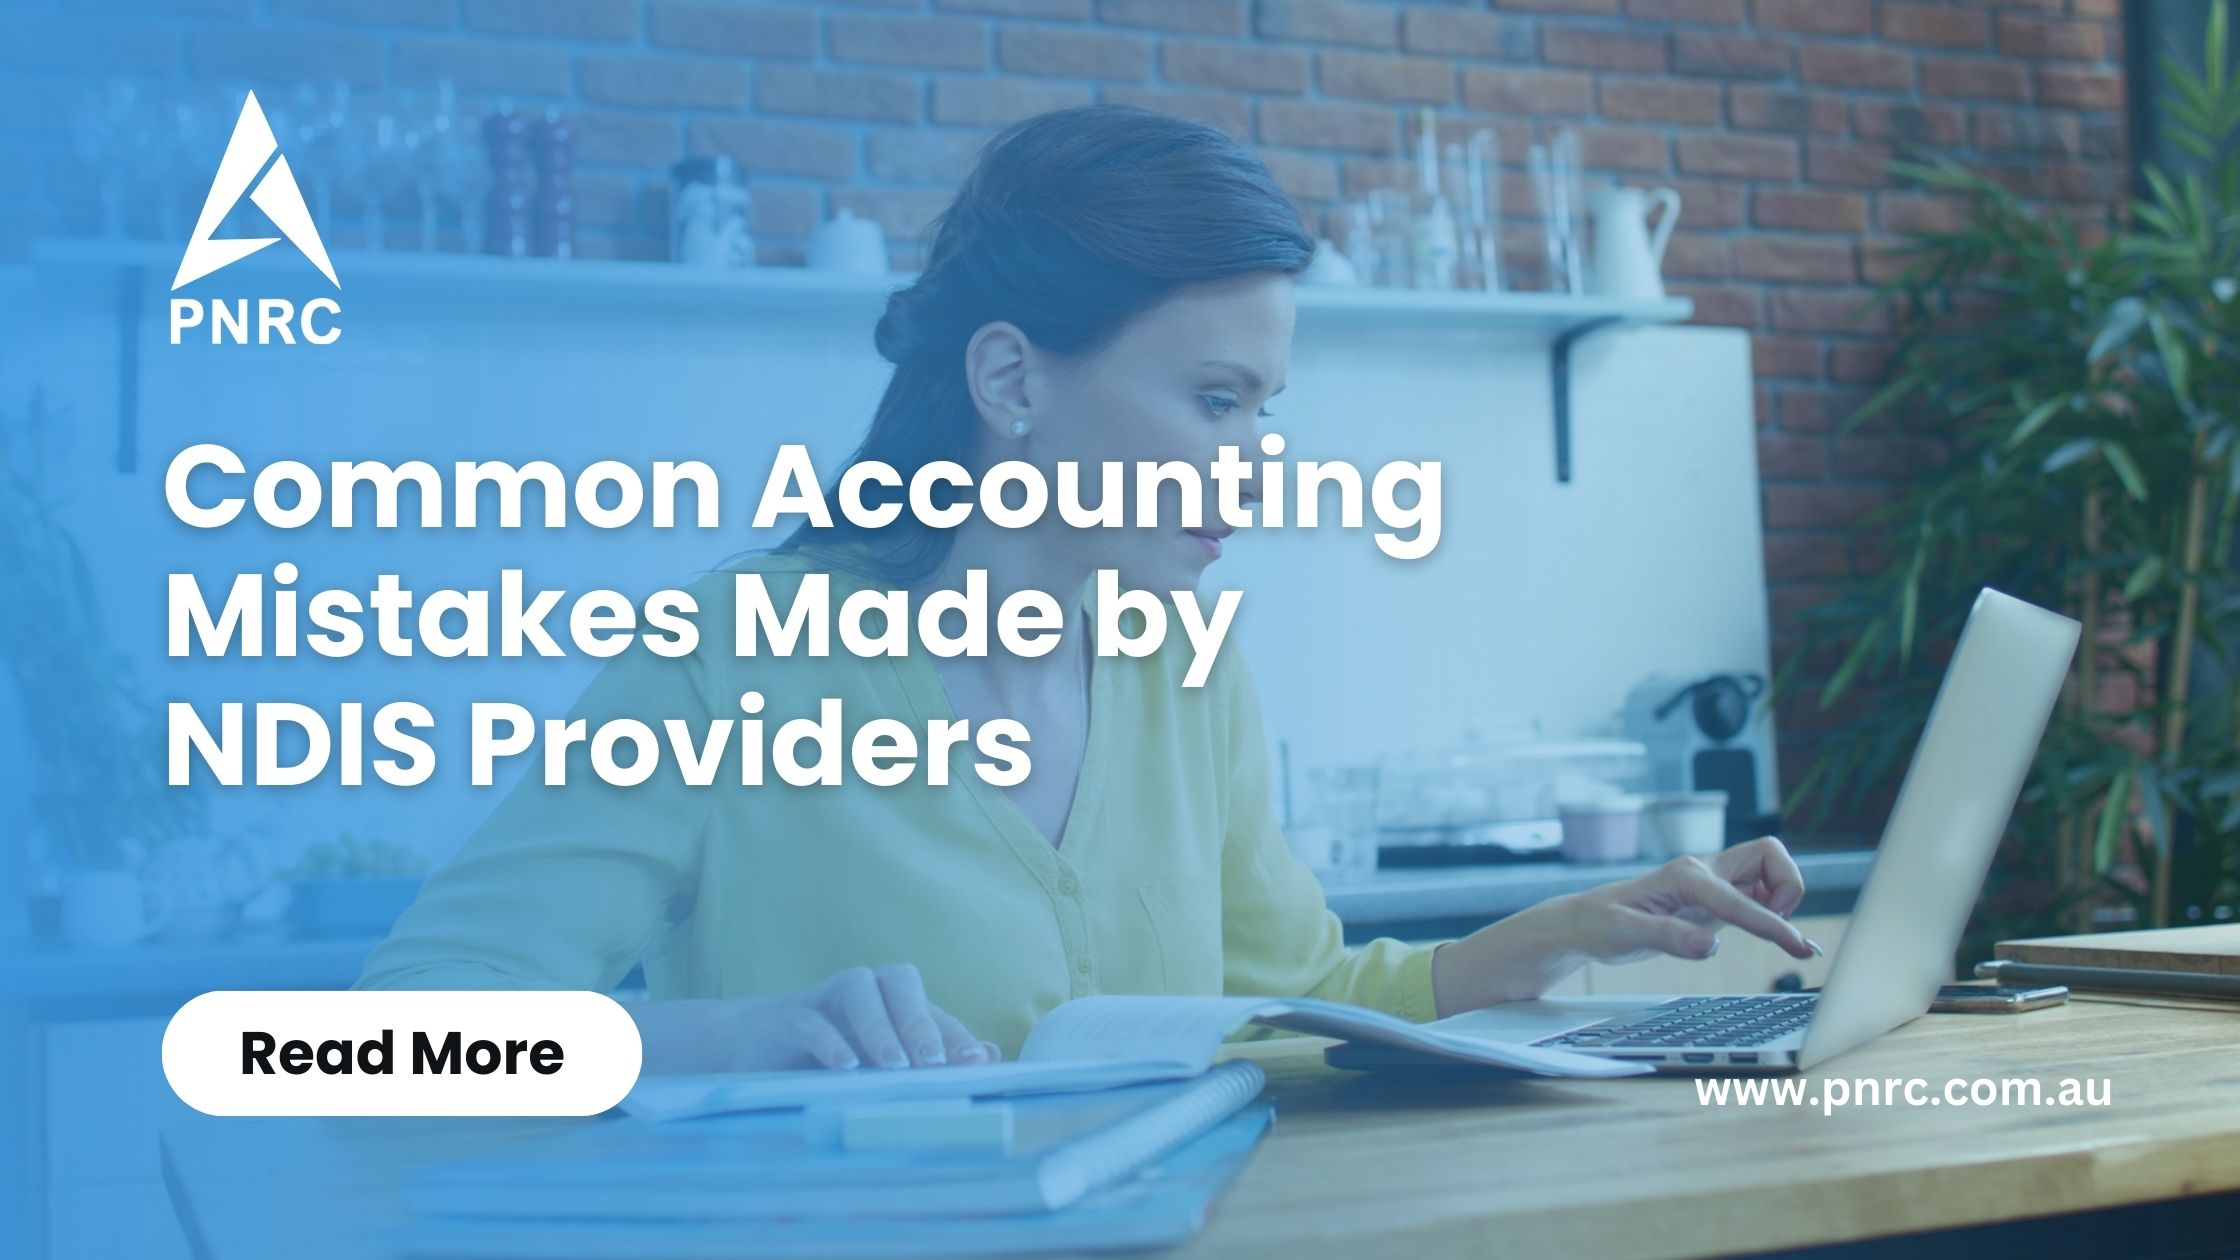 Common Accounting Mistakes Made by NDIS Providers